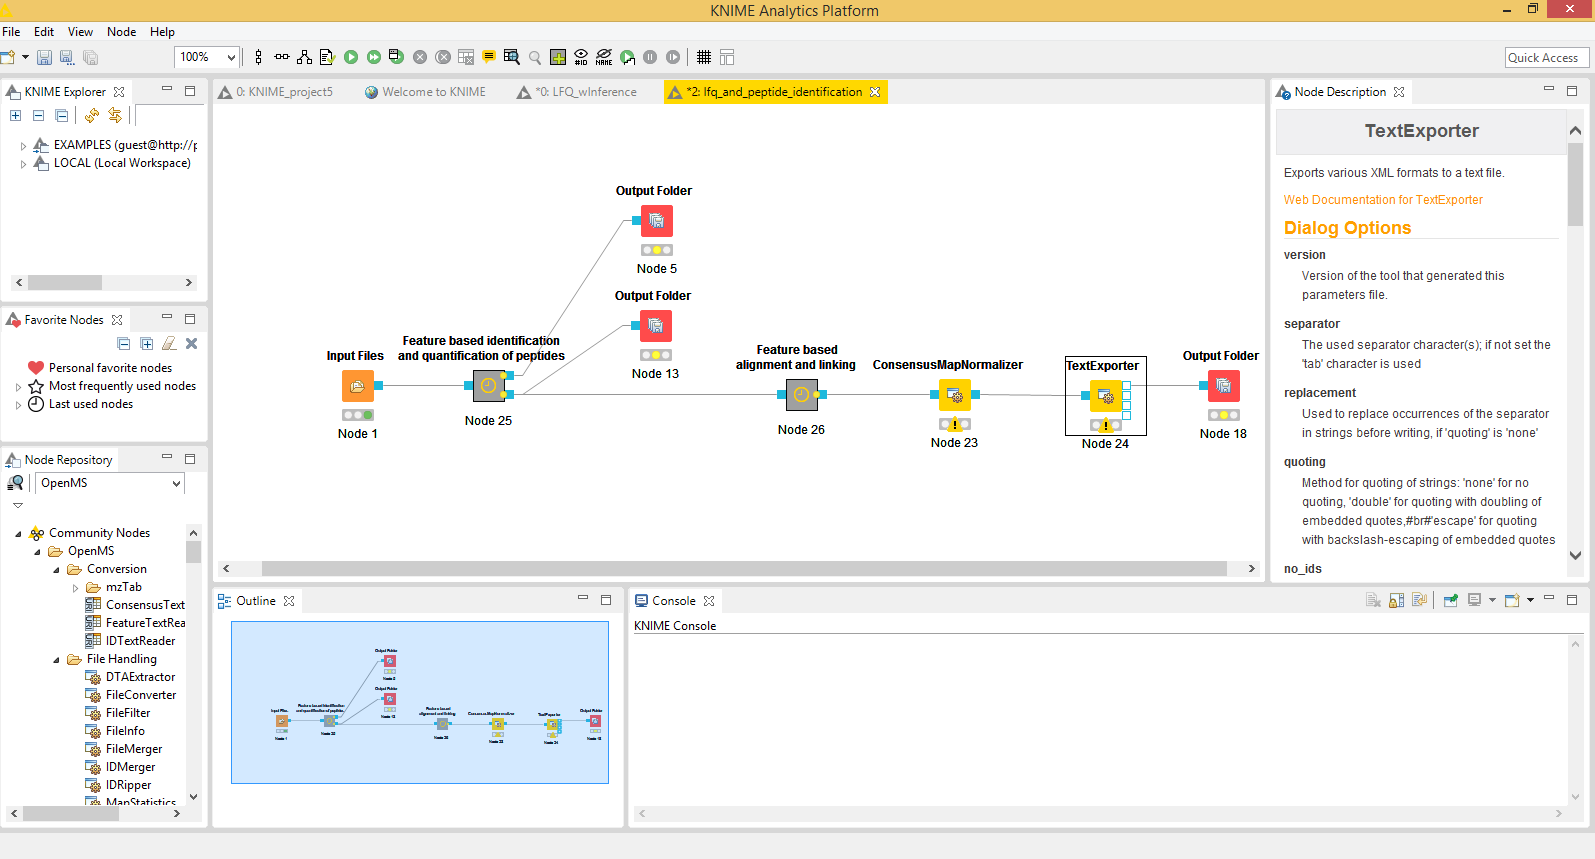 Example workflow in KNIME